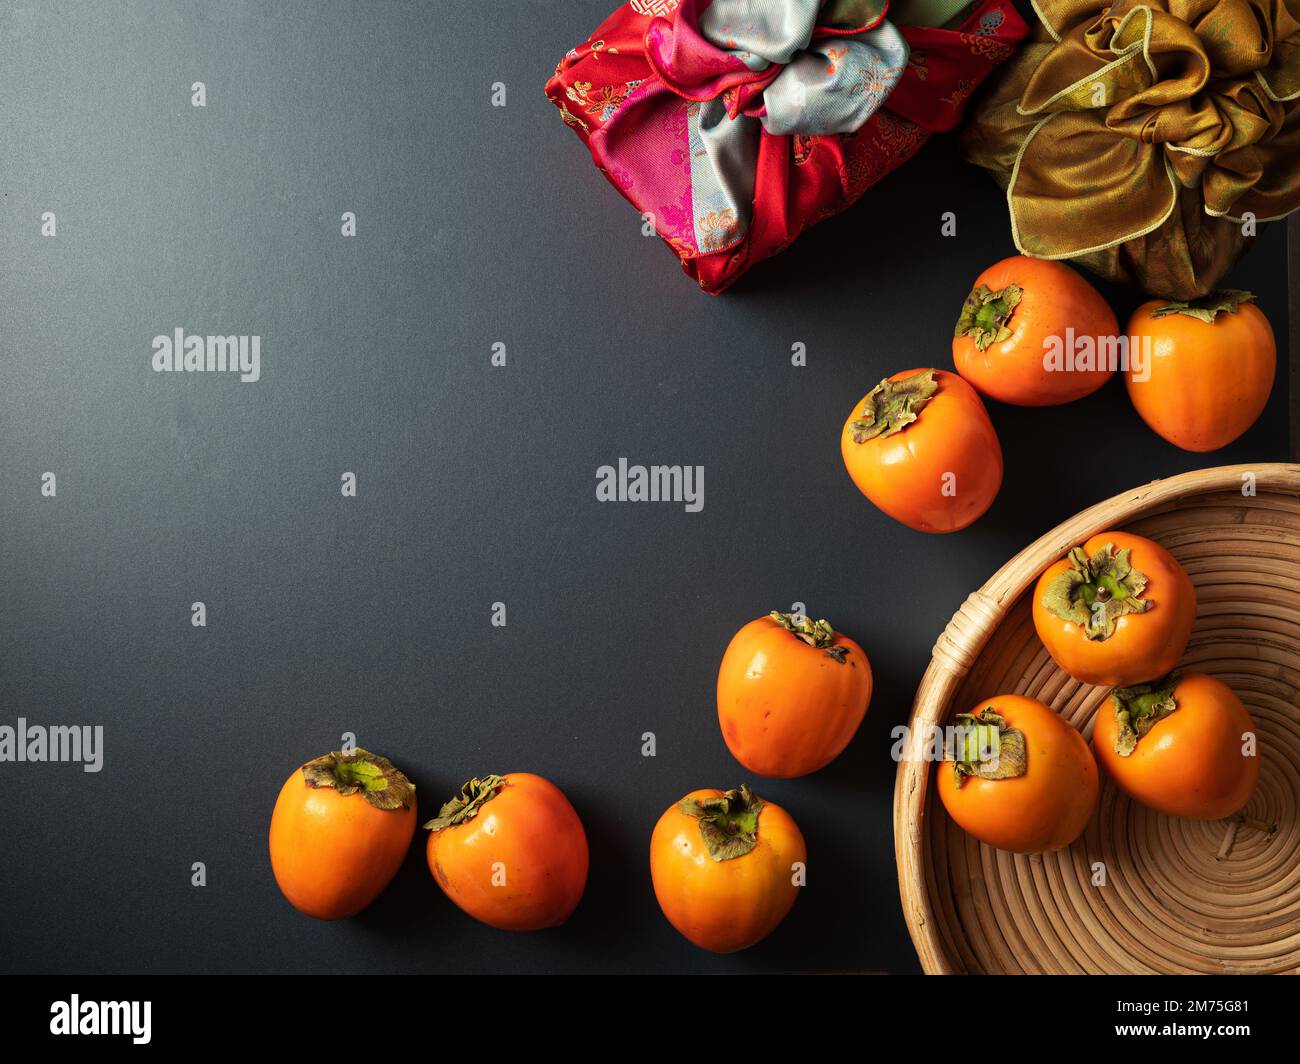 Korean traditional gift with persimmons on dark background Stock Photo